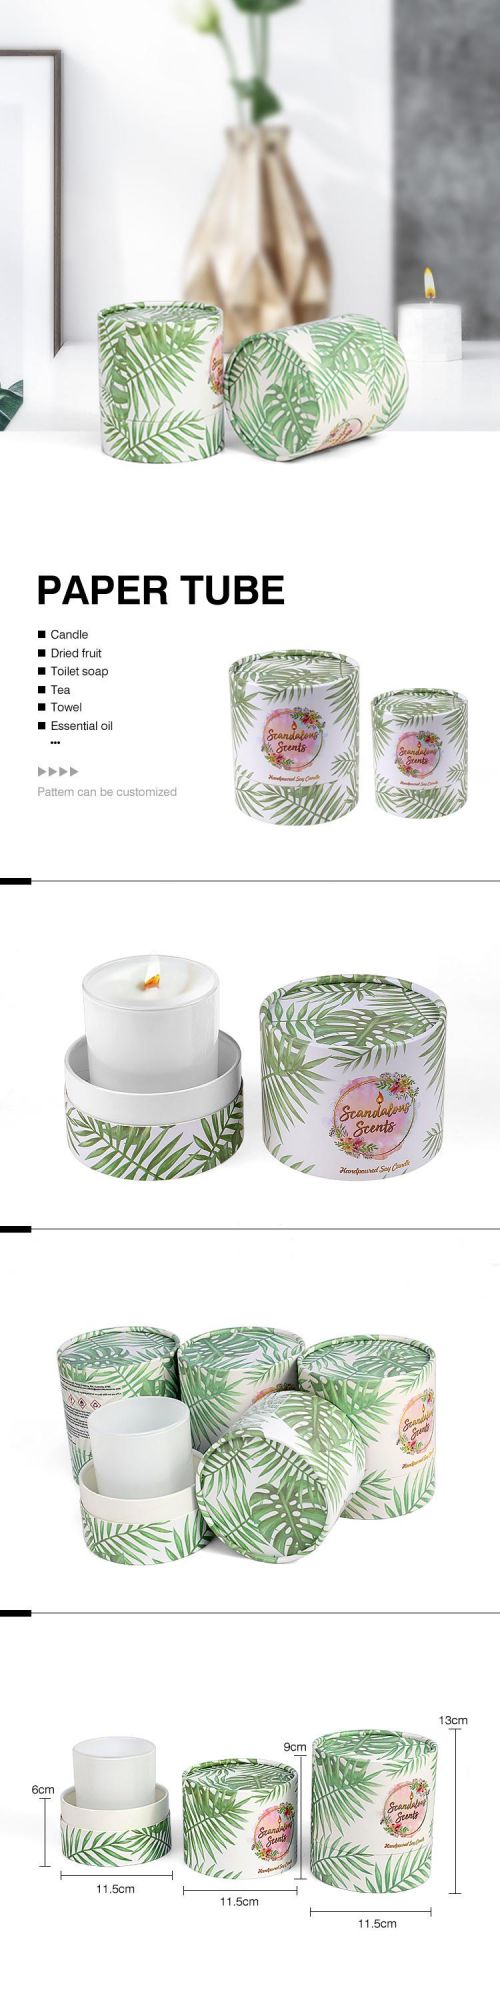 Firstsail New Arrival Luxury Cylinder Cardboard Empty Candle Jar Gift Box Packaging Scented Reed Diffuser Bottle Paper Tube